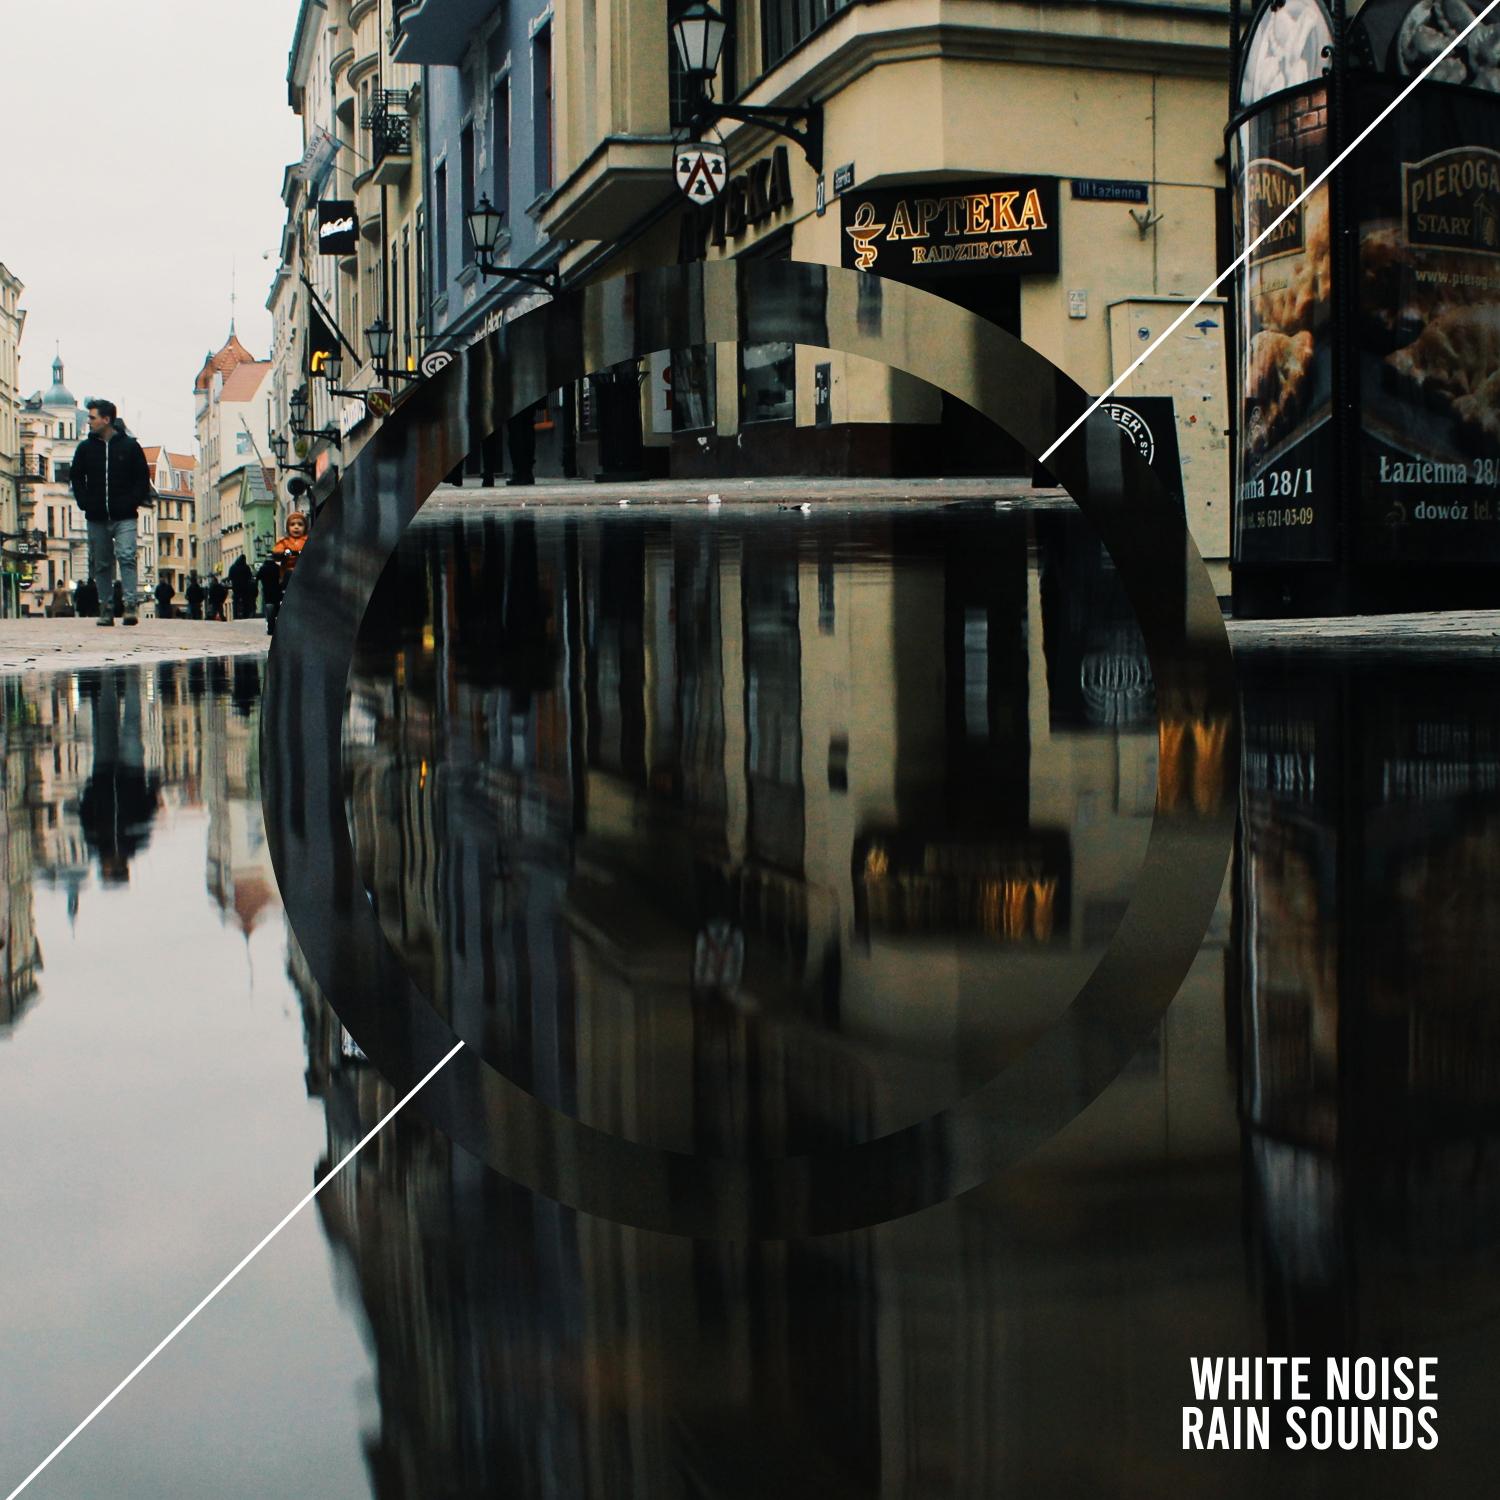 16 White Noise Rain Sounds - Natural, Loopable Sounds for Relaxation, Sleeping, Meditation & Yoga